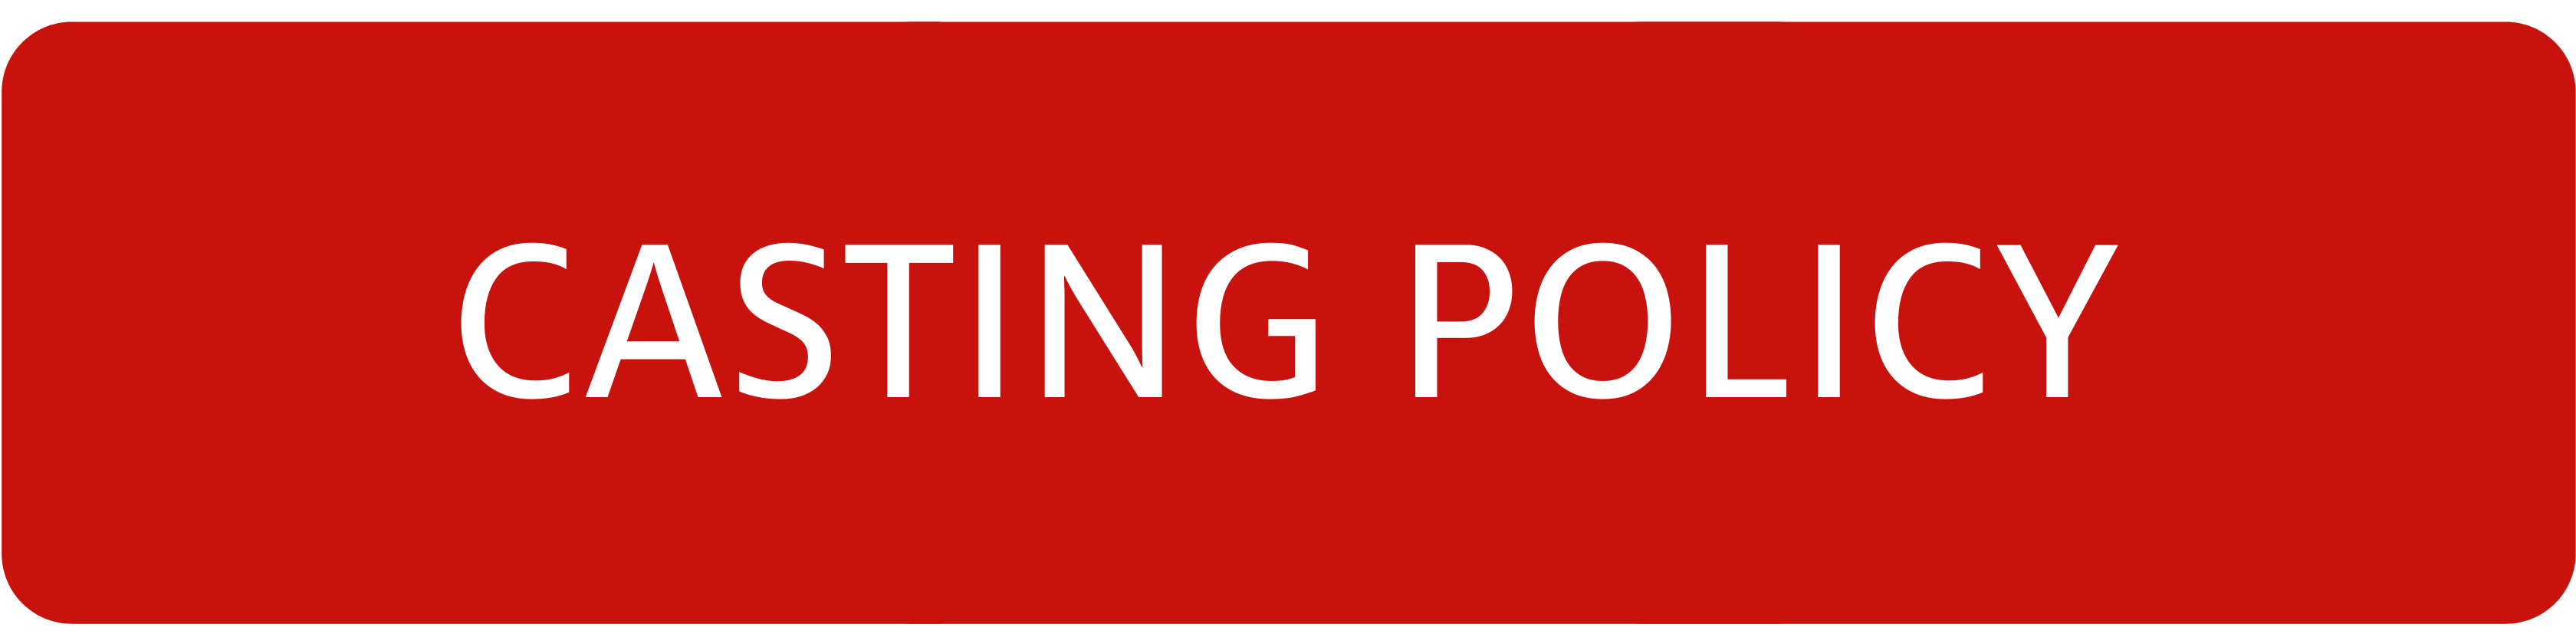 casting-policy-button-graphics-6.png